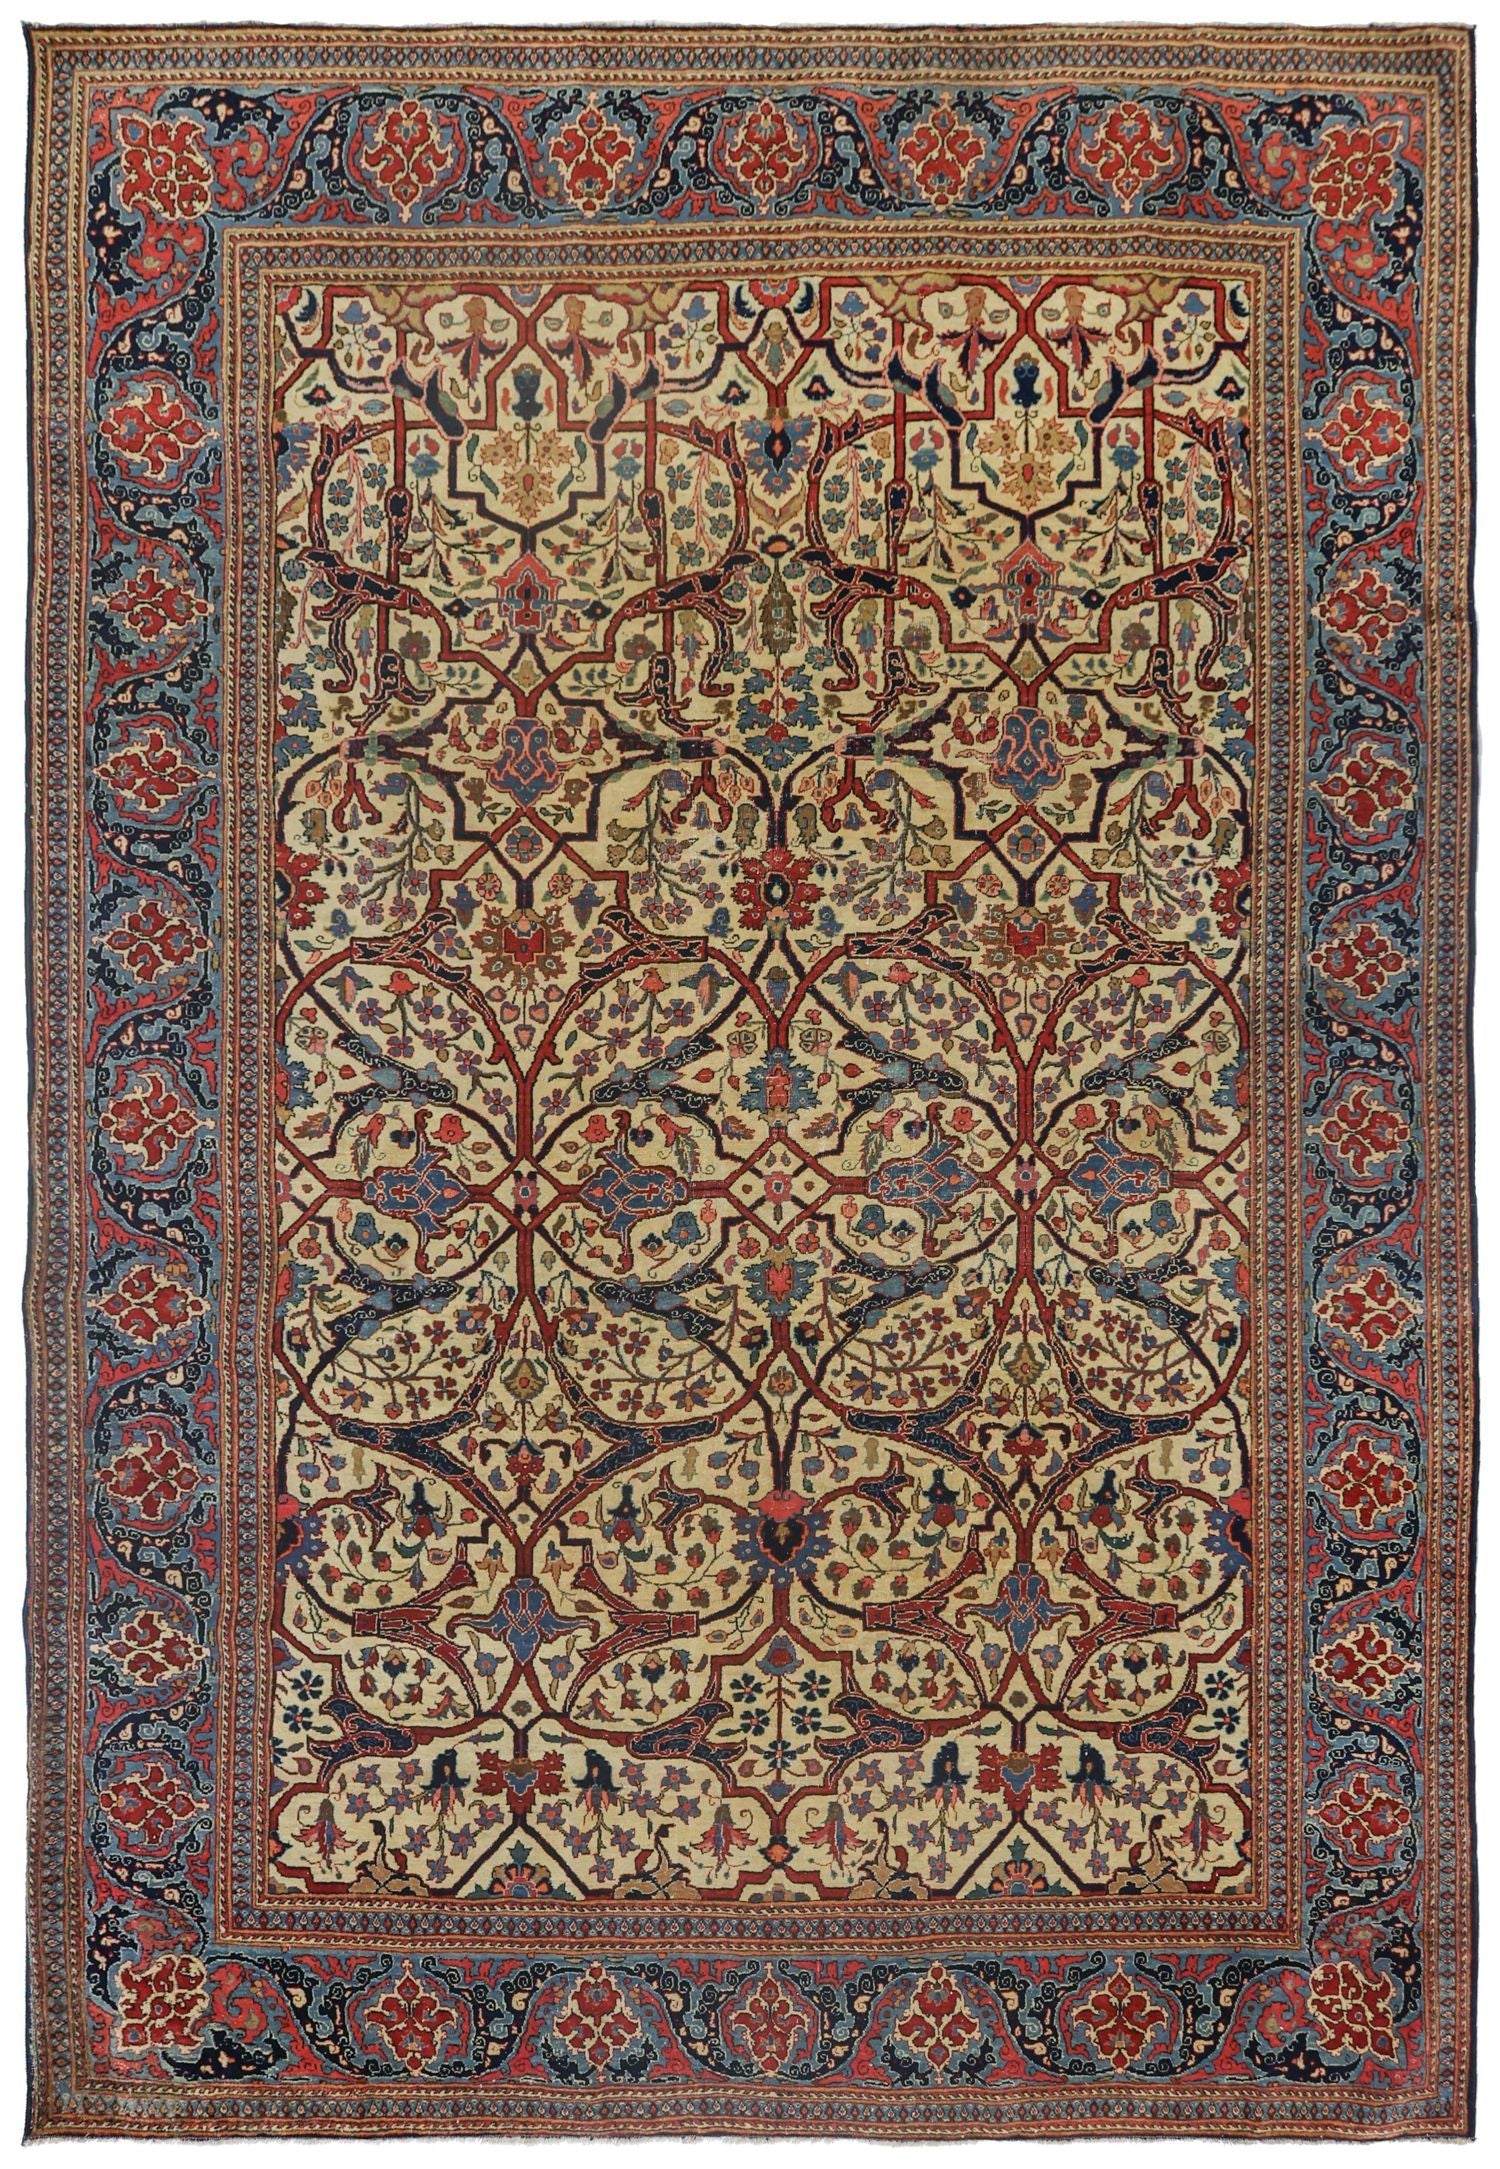 AntiqueHandwoven Traditional Rug